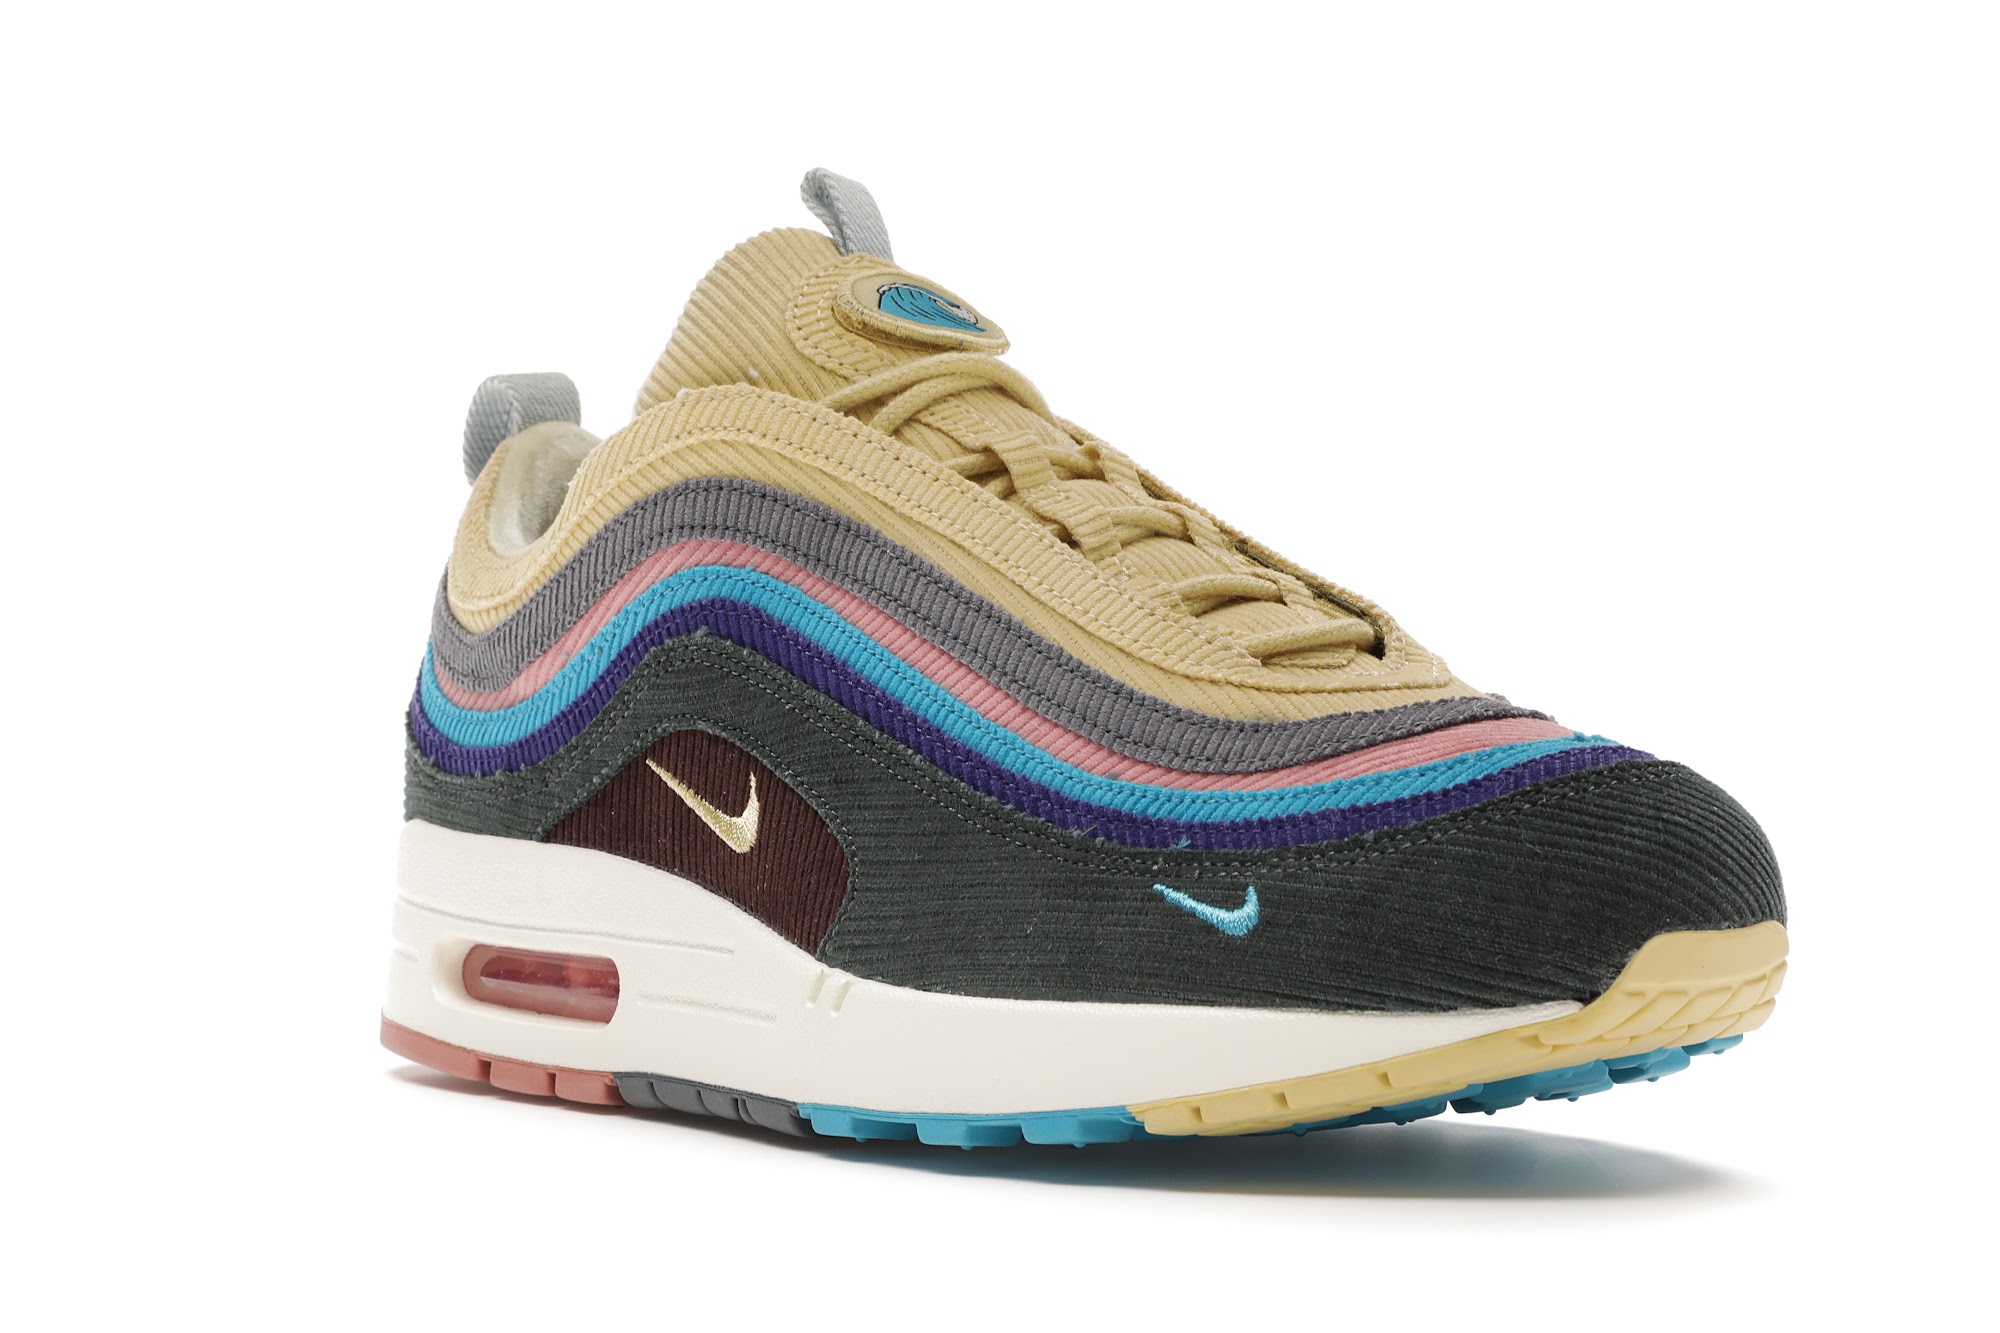 Nike Air Max 1/97 Sean Wotherspoon (All Accessories and Dustbag ...